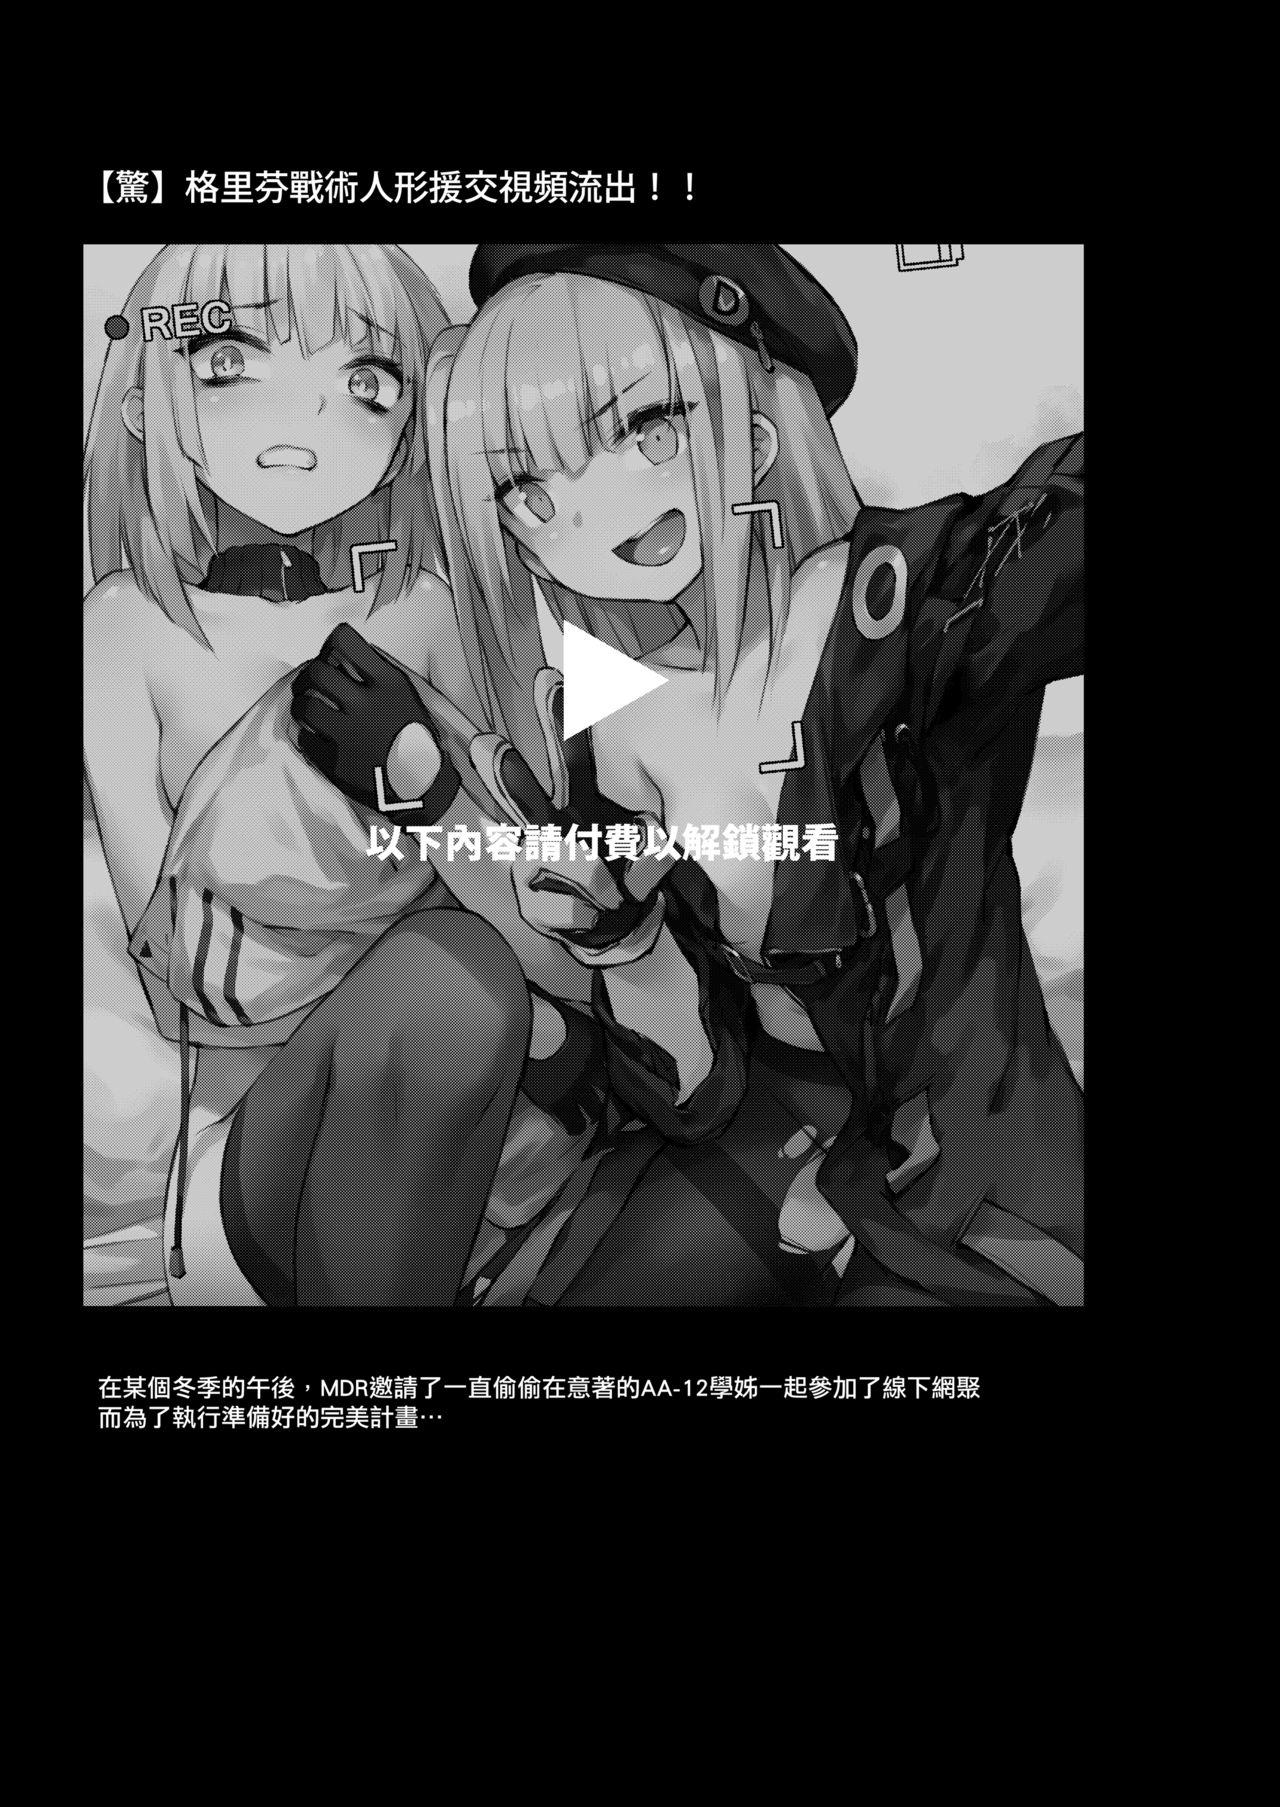 Homosexual A Video of Griffin T-Dolls Having Sex For Money Just Leaked! - Girls frontline Taiwan - Page 2